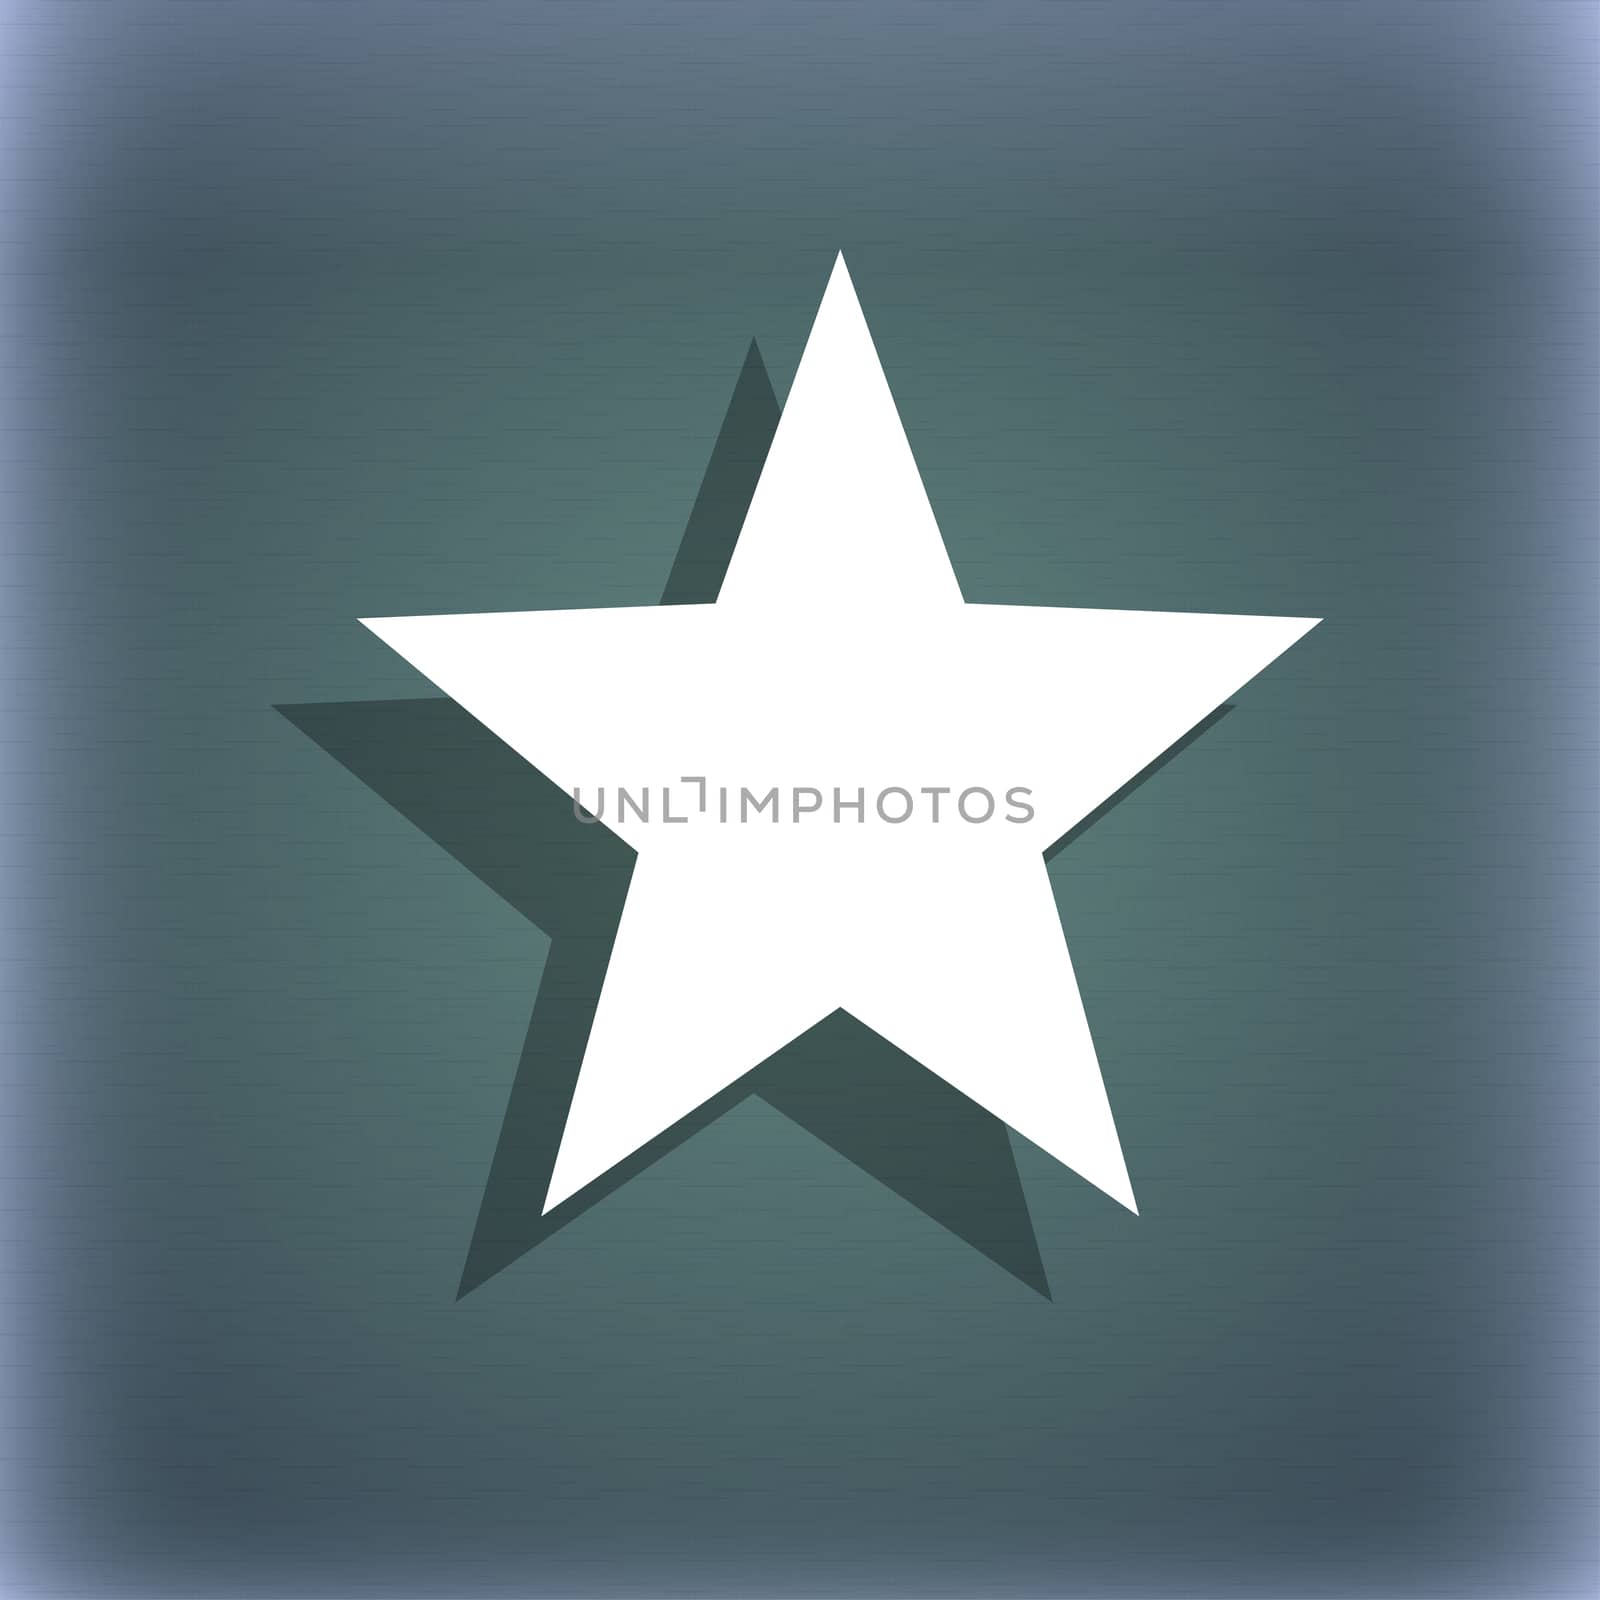 Star, Favorite icon symbol on the blue-green abstract background with shadow and space for your text. illustration